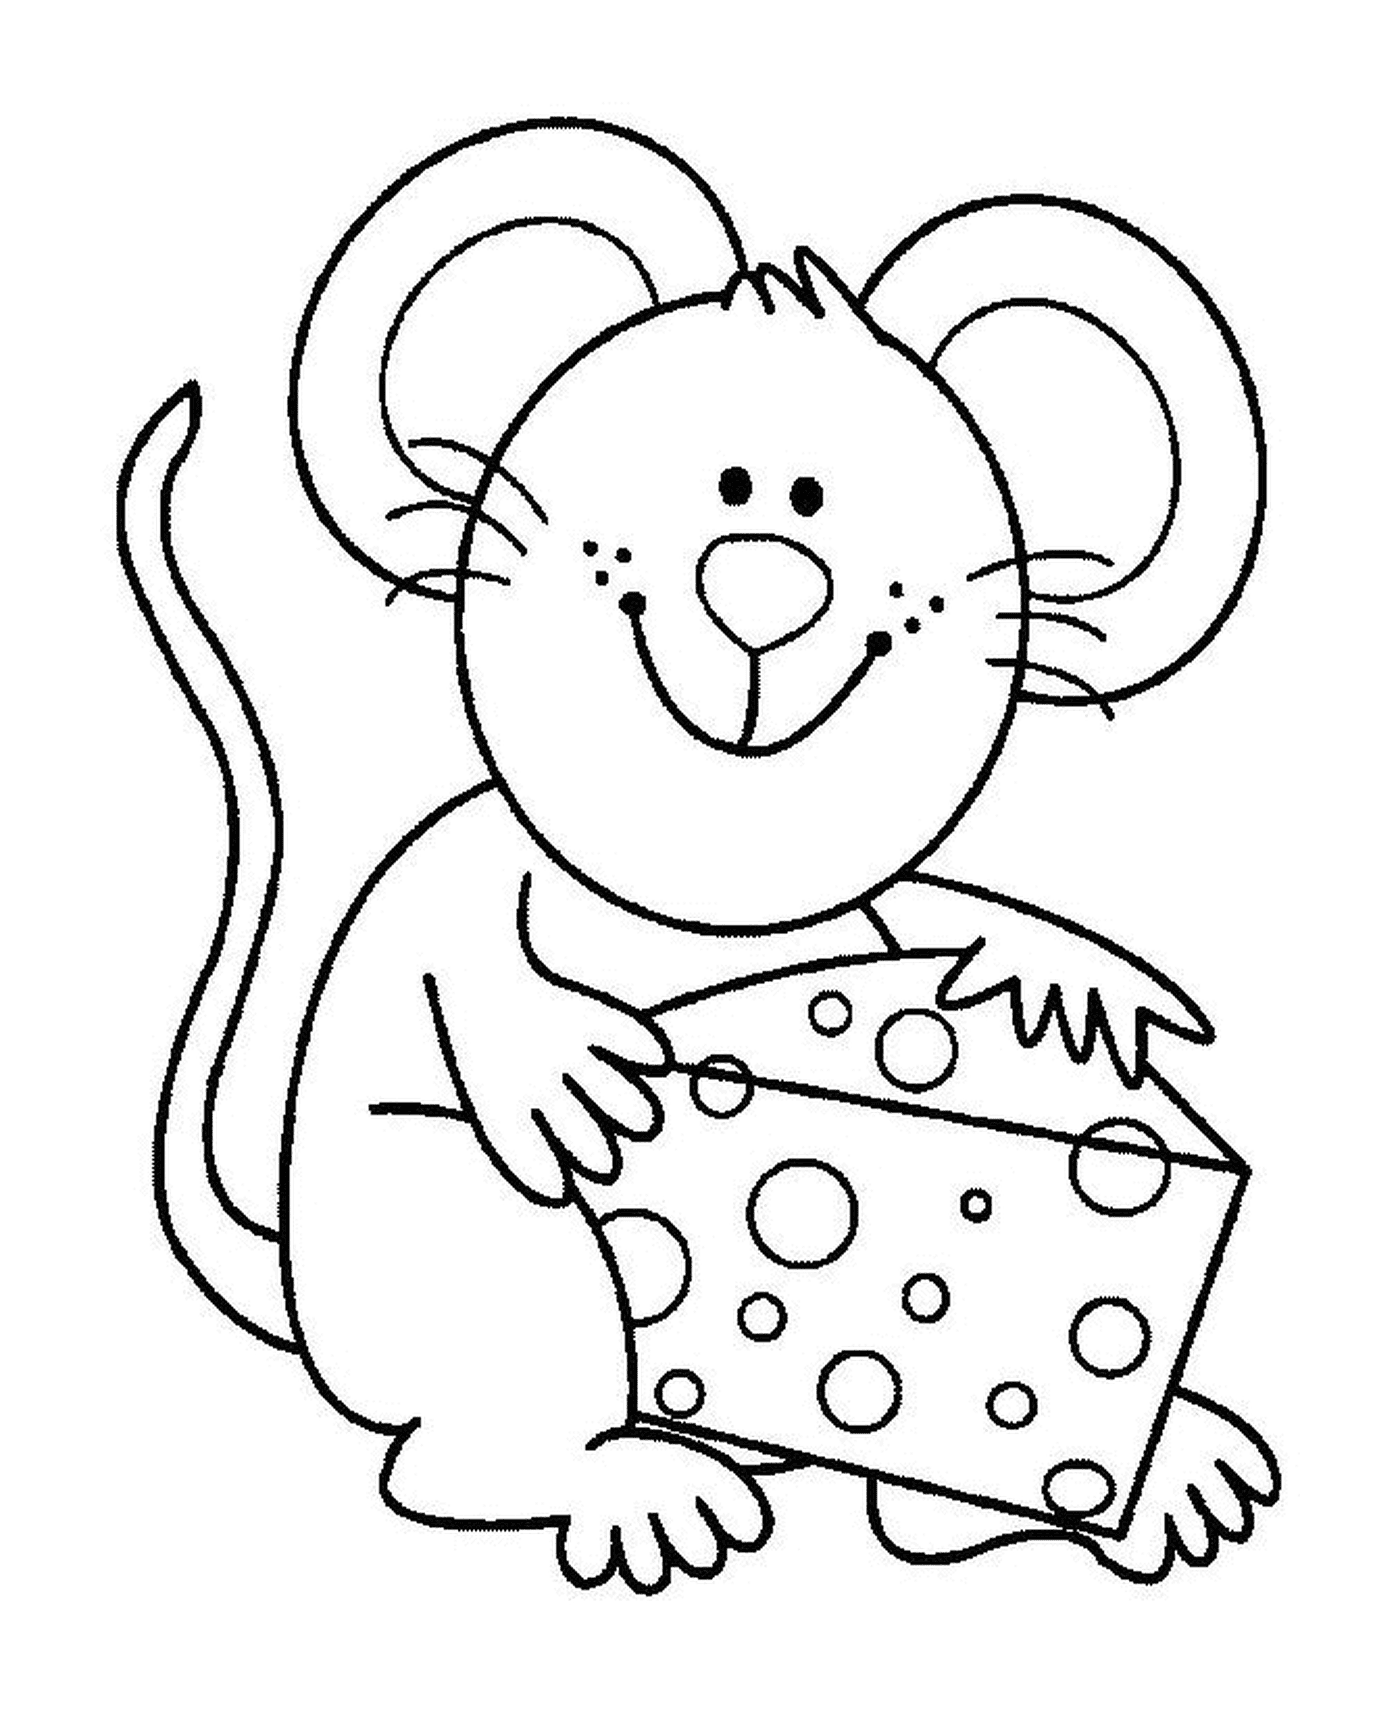  A mouse with good cheese 